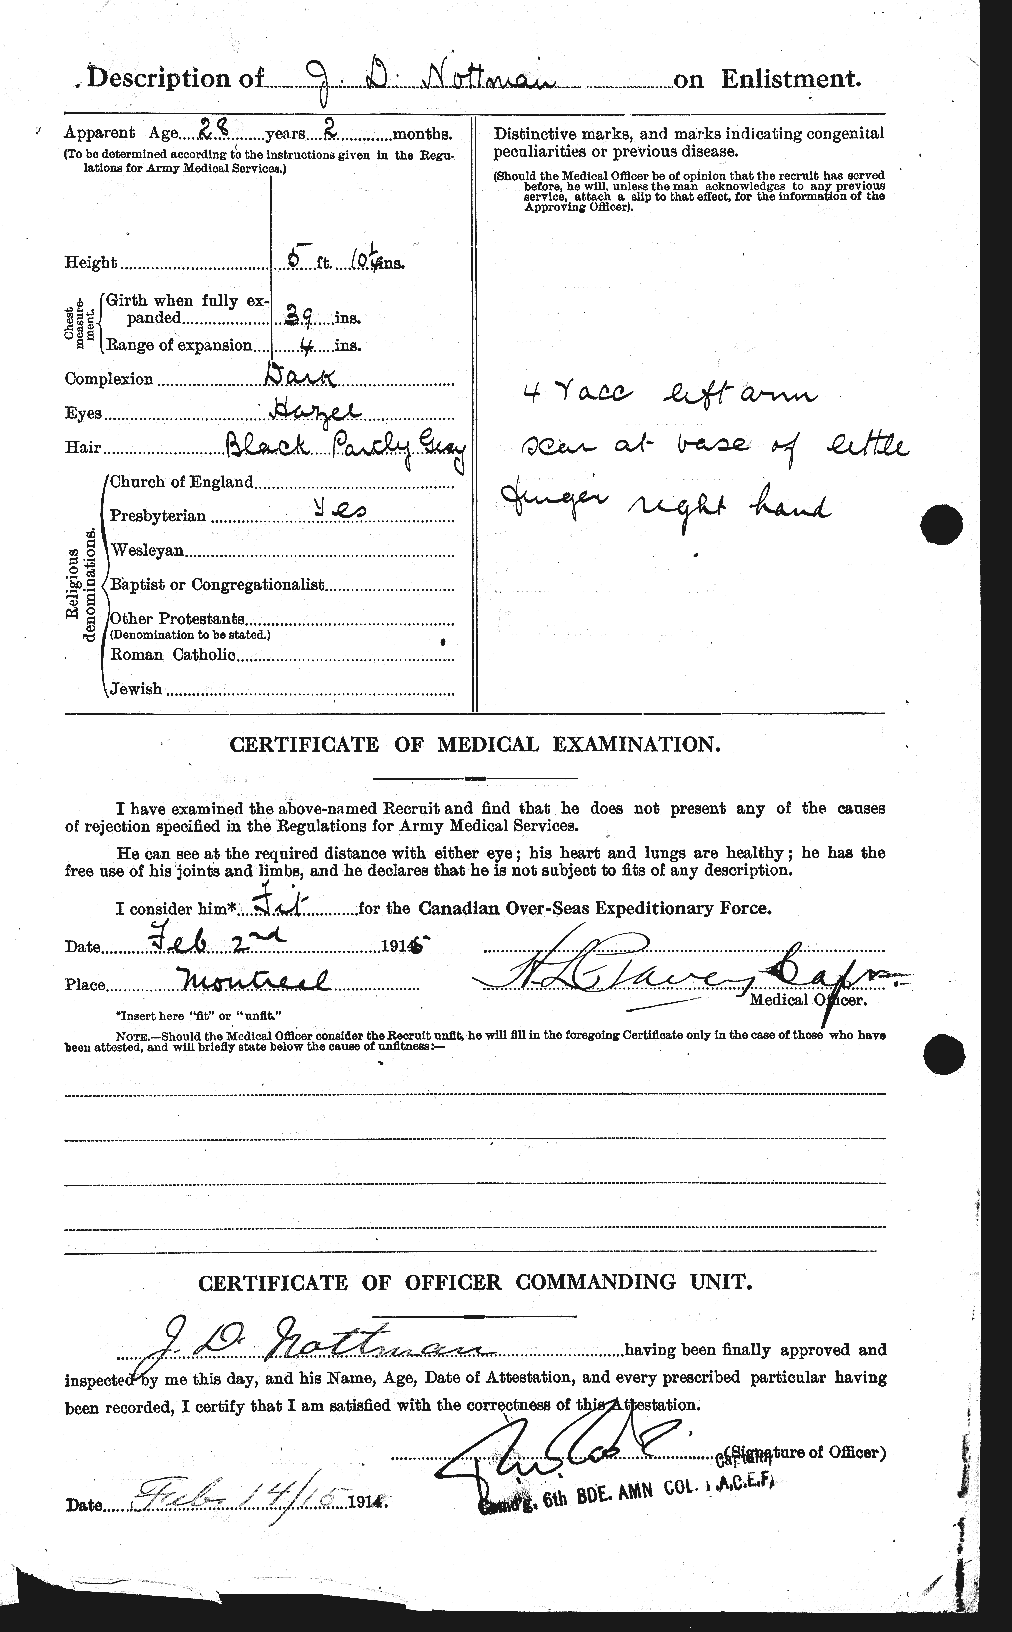 Personnel Records of the First World War - CEF 552028b